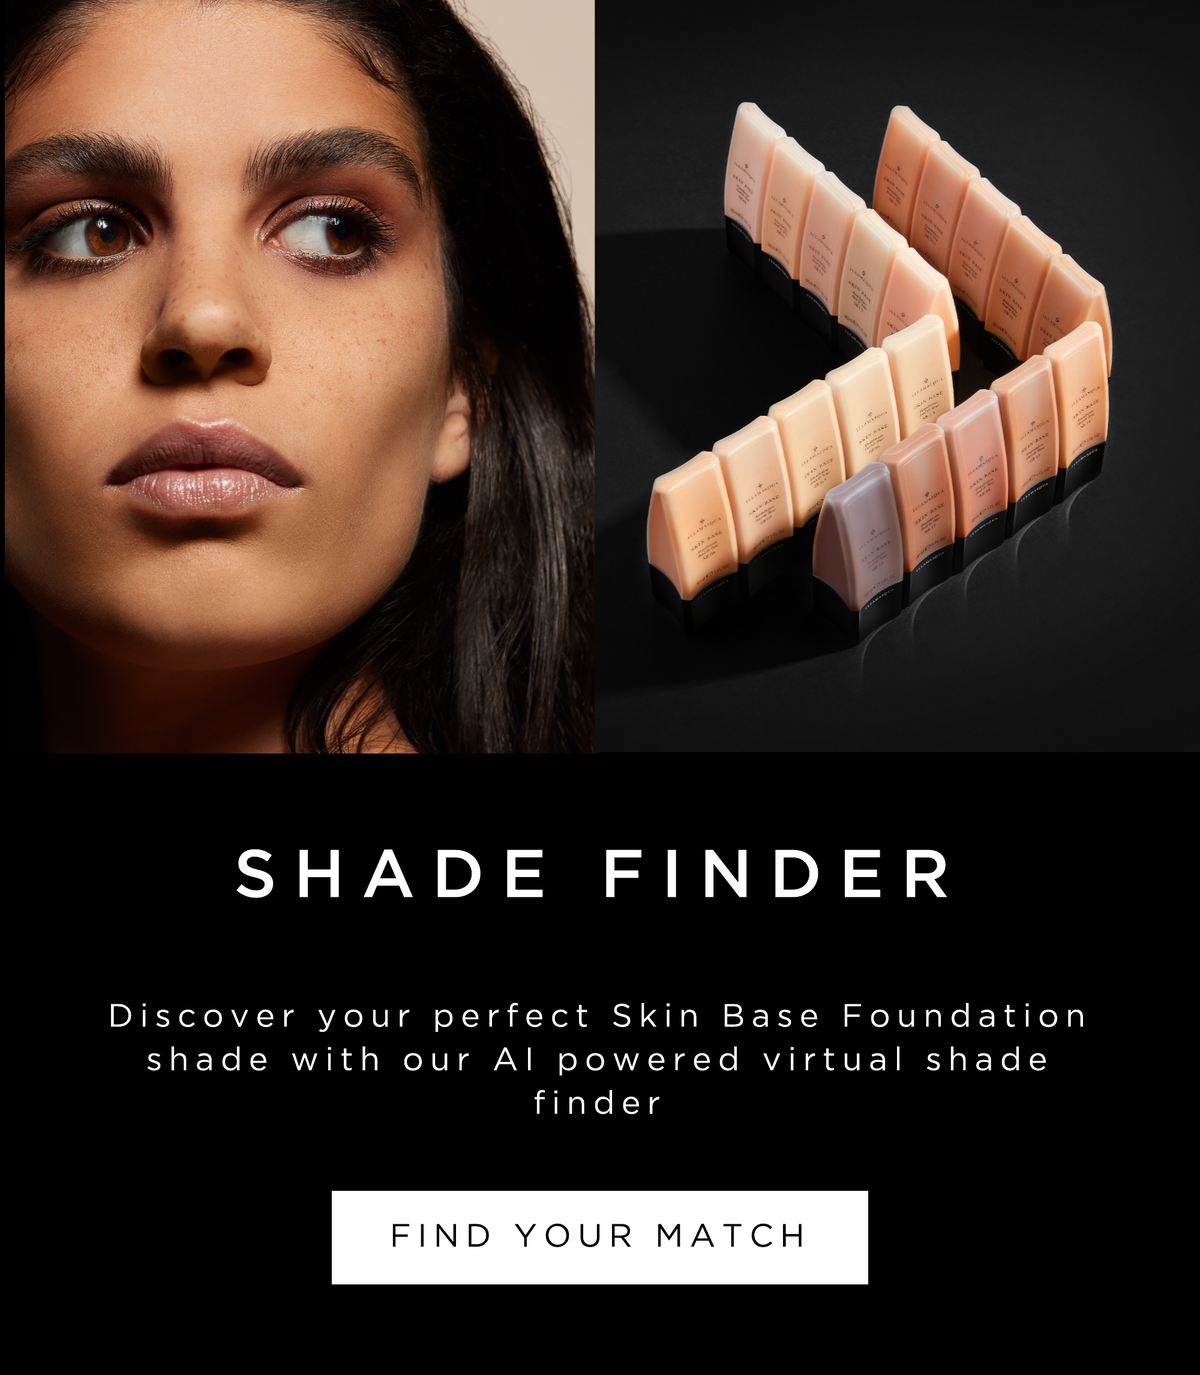 Discover your perfect Skin Base Foundation shade with our AI powered virtual shade finder